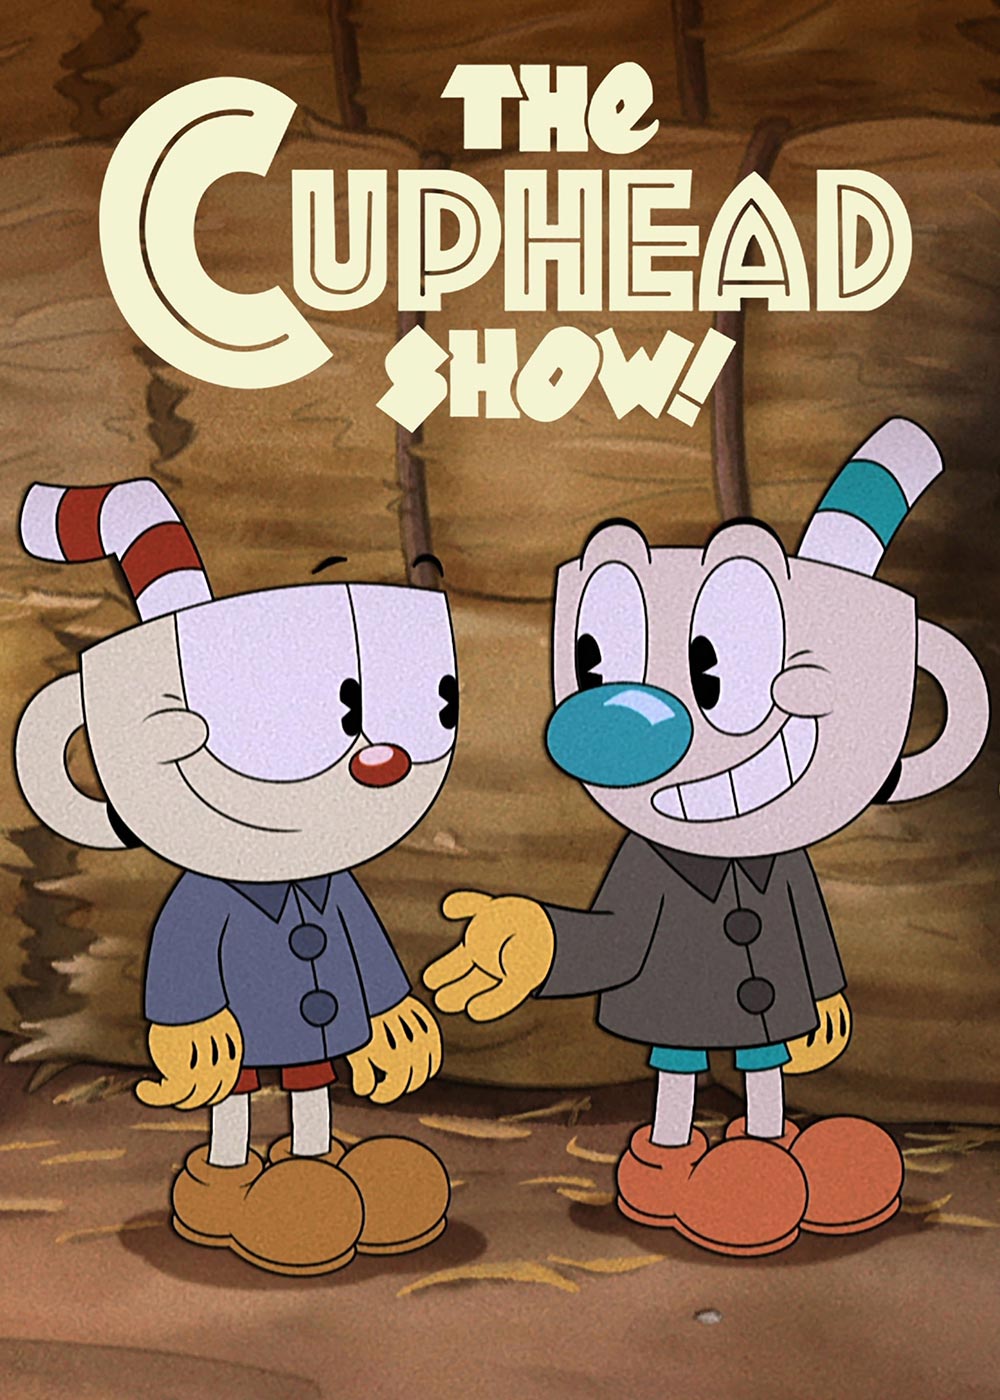 The Cuphead Show season 3: Will there be another season?